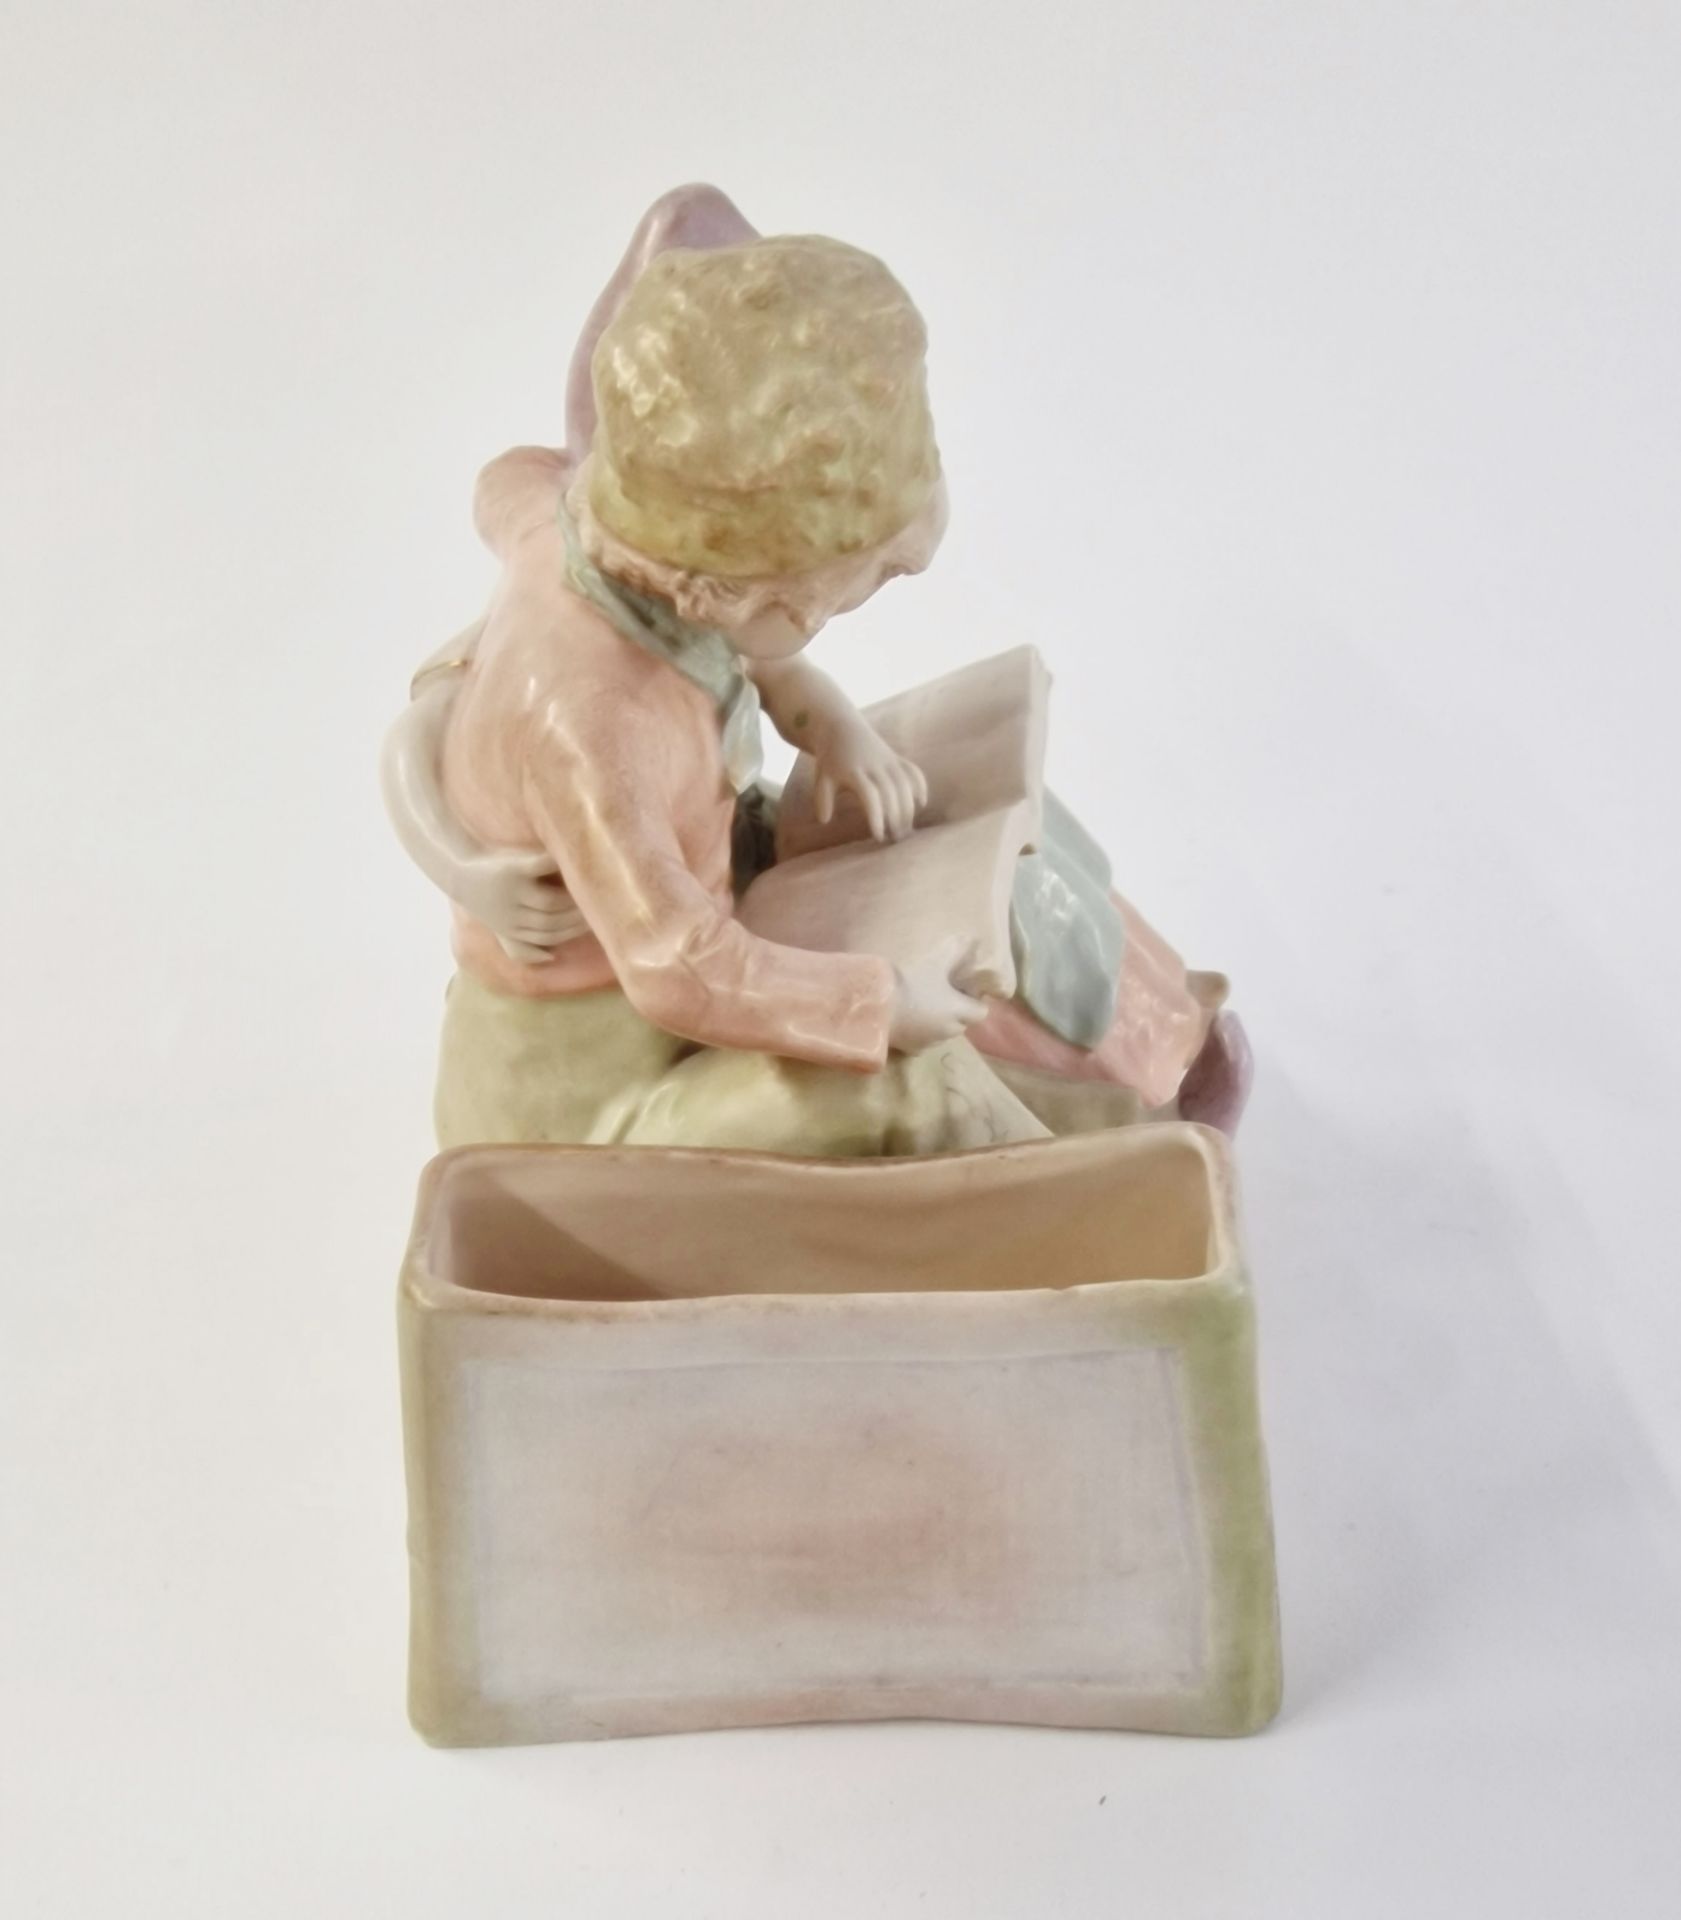 Early 20th century Vienna (Amphora) ceramic figure group of two Dutch-style children embracing, - Image 4 of 6